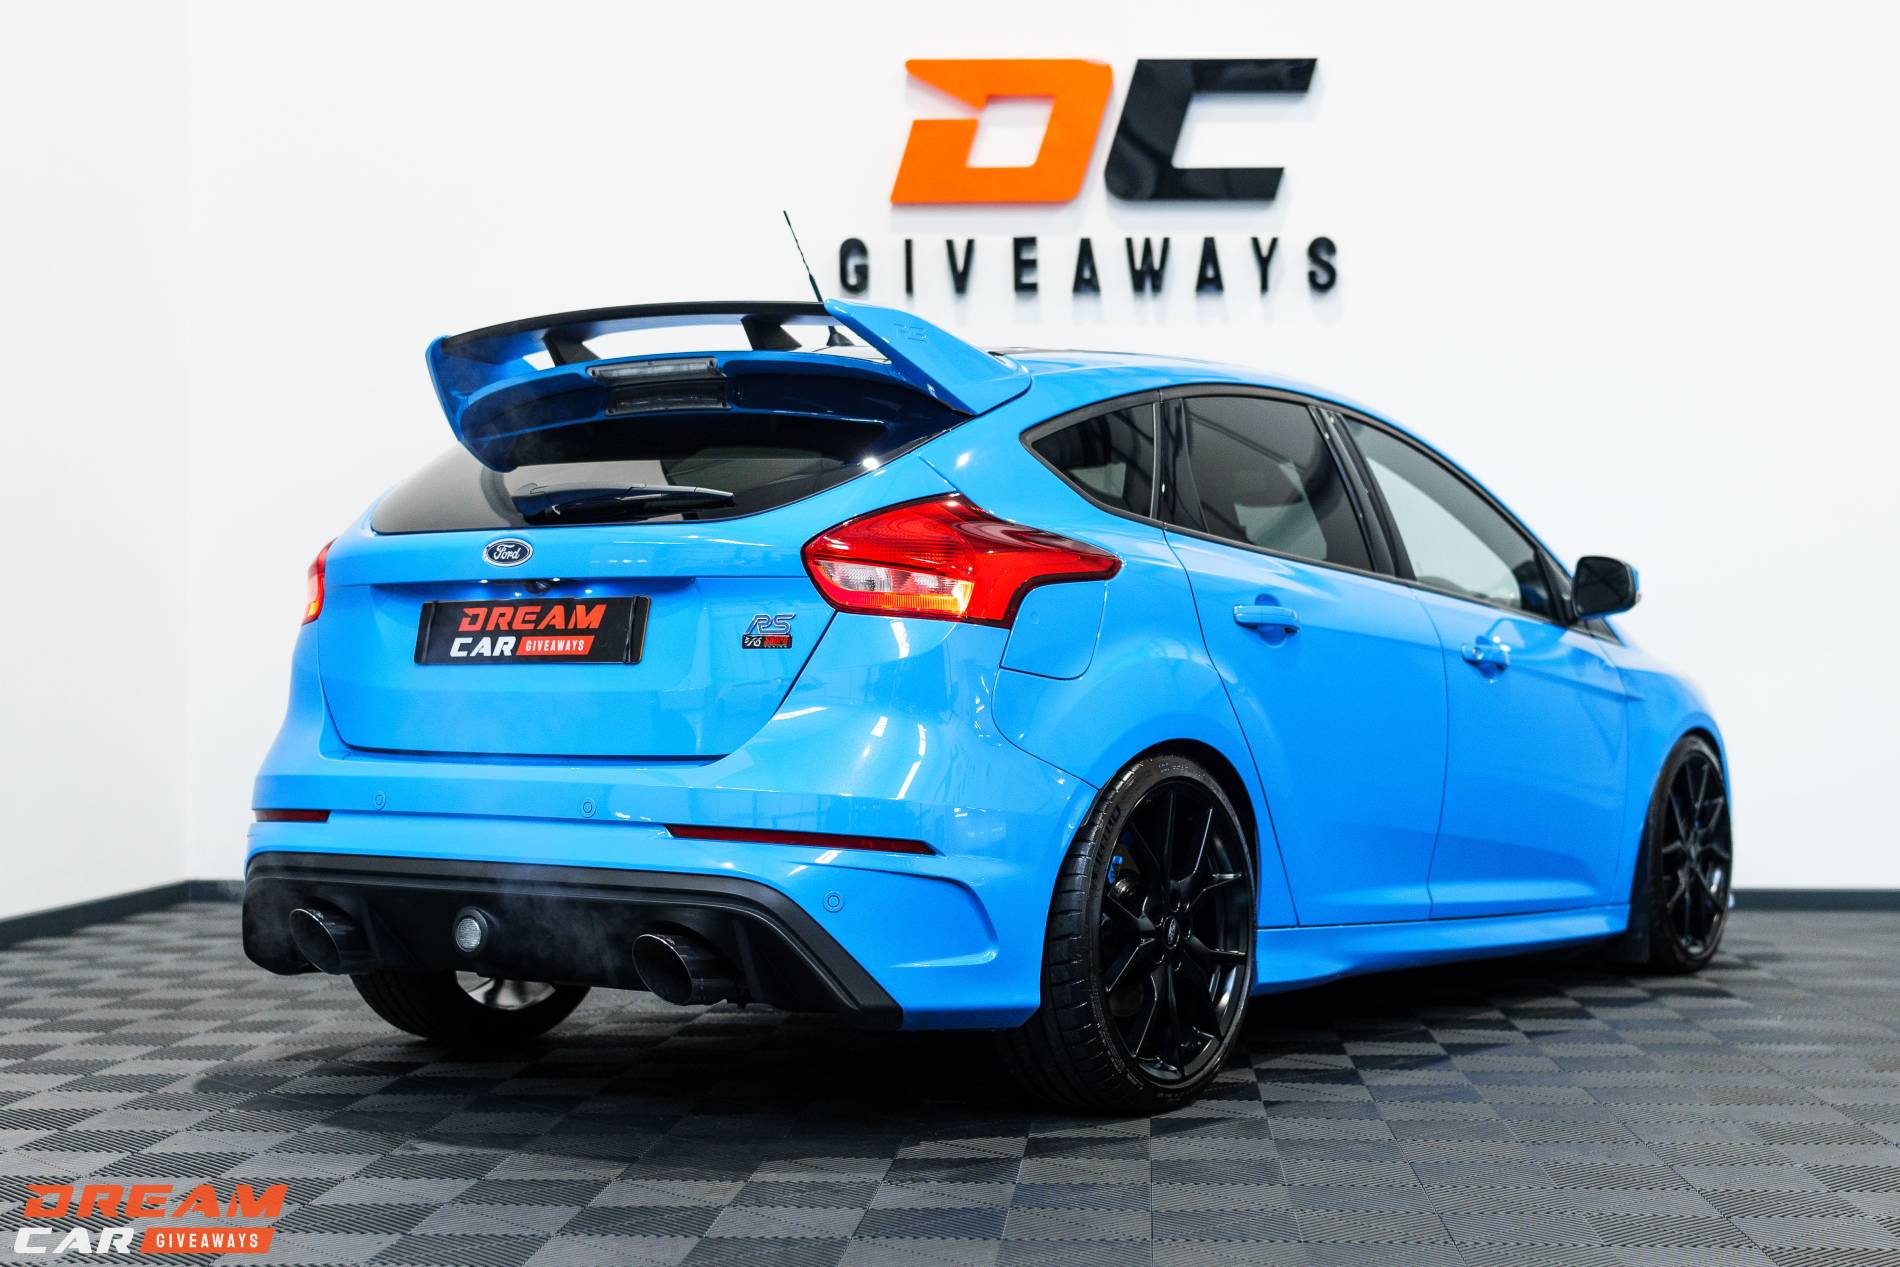 Win this Mk3 Ford Focus RS & £1,000